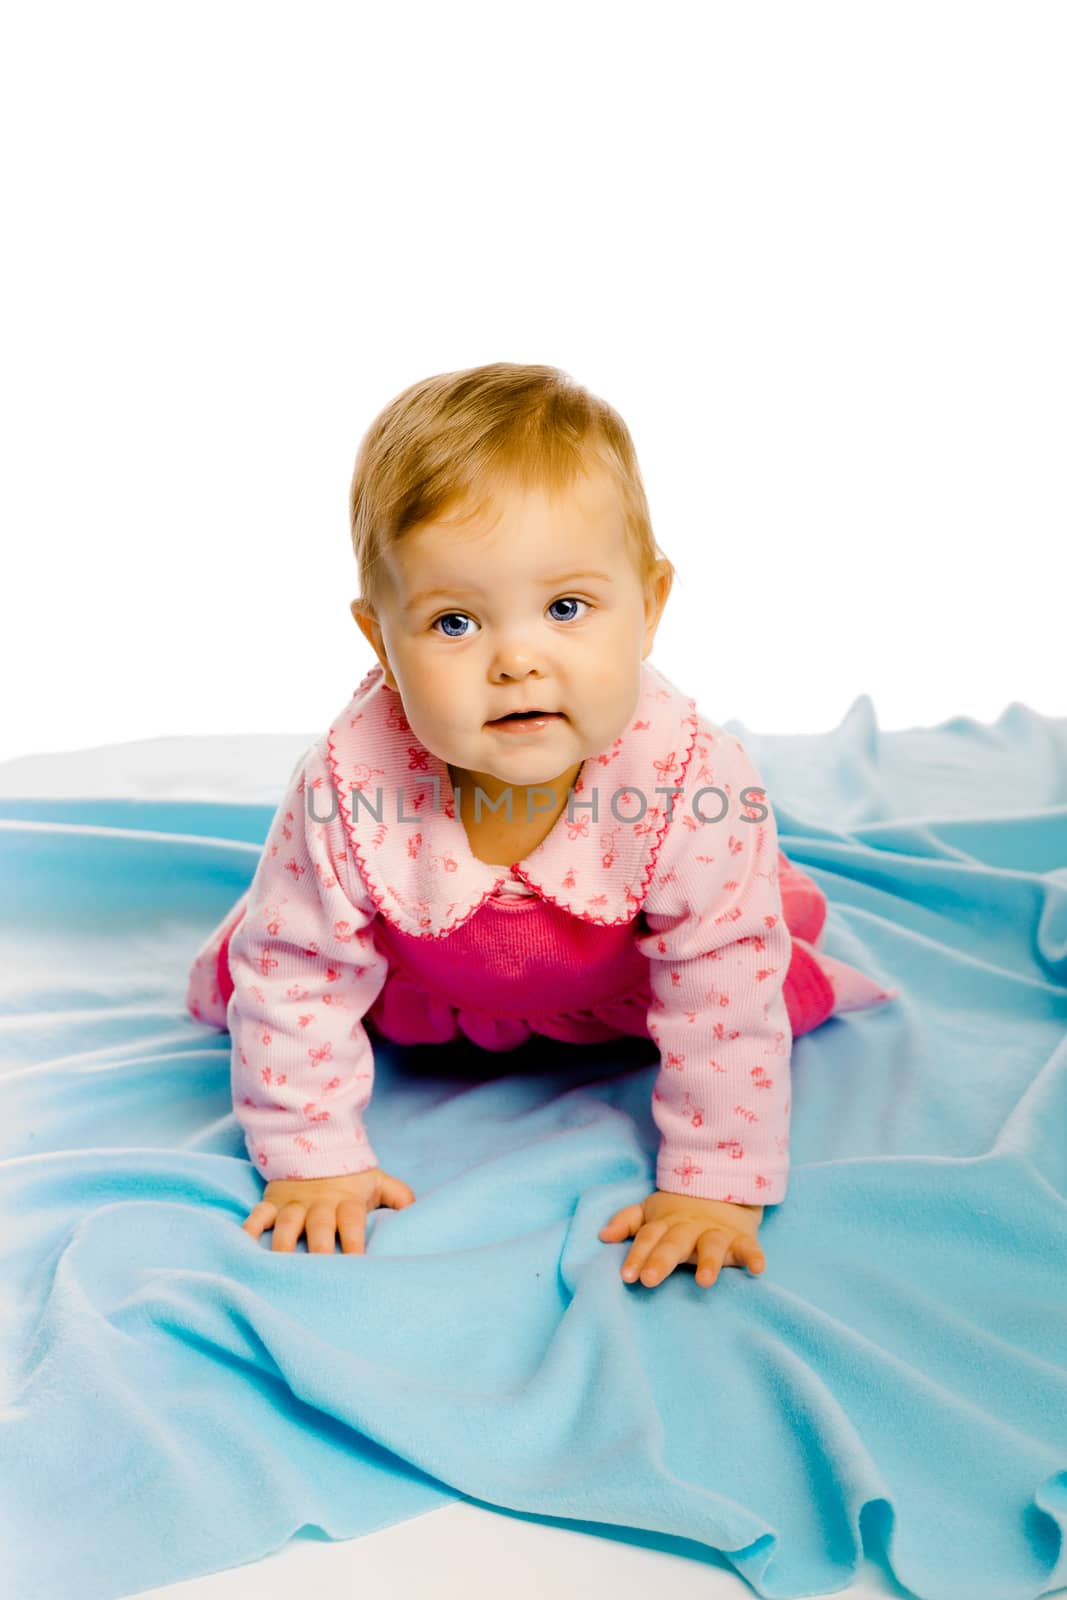 baby girl crawling on the blue coverlet. Studio by pzRomashka